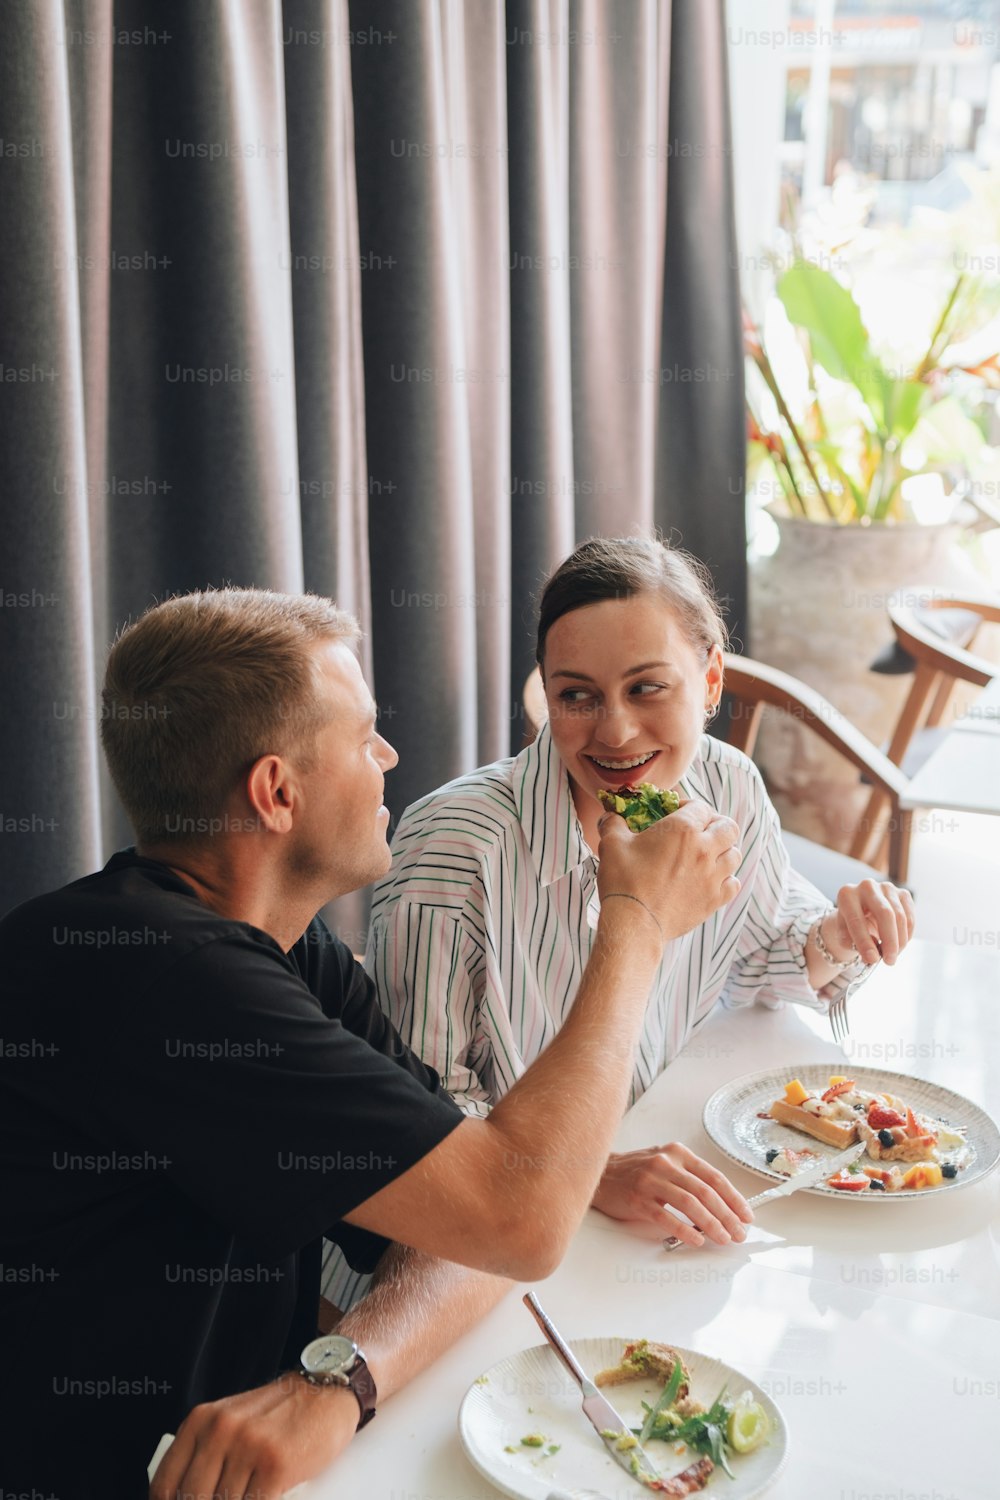 a man and a woman sitting at a table eating food